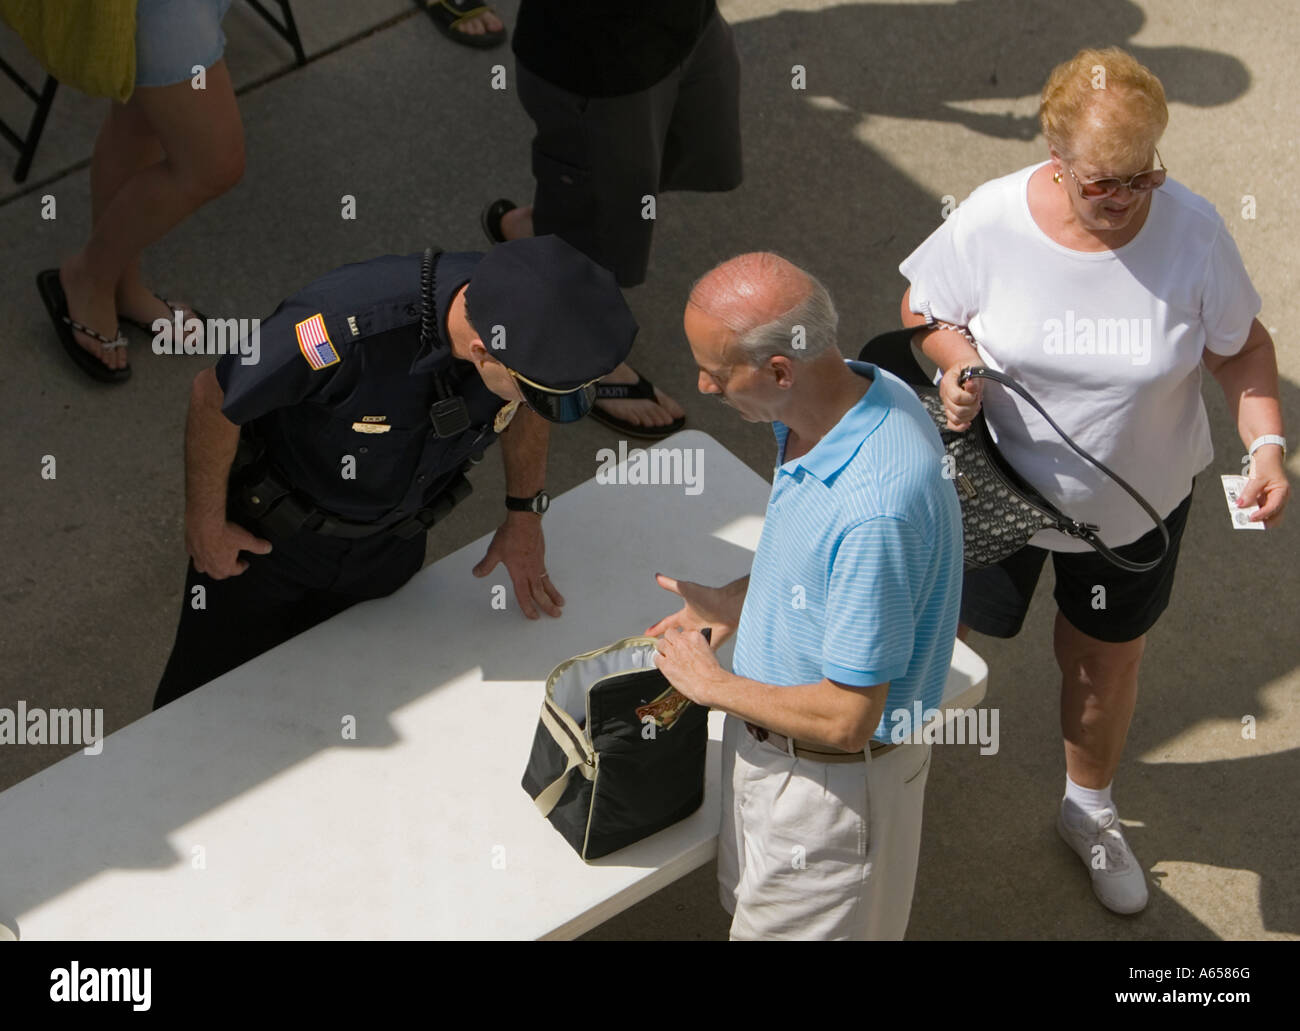 Spectators being searched by security Stock Photo